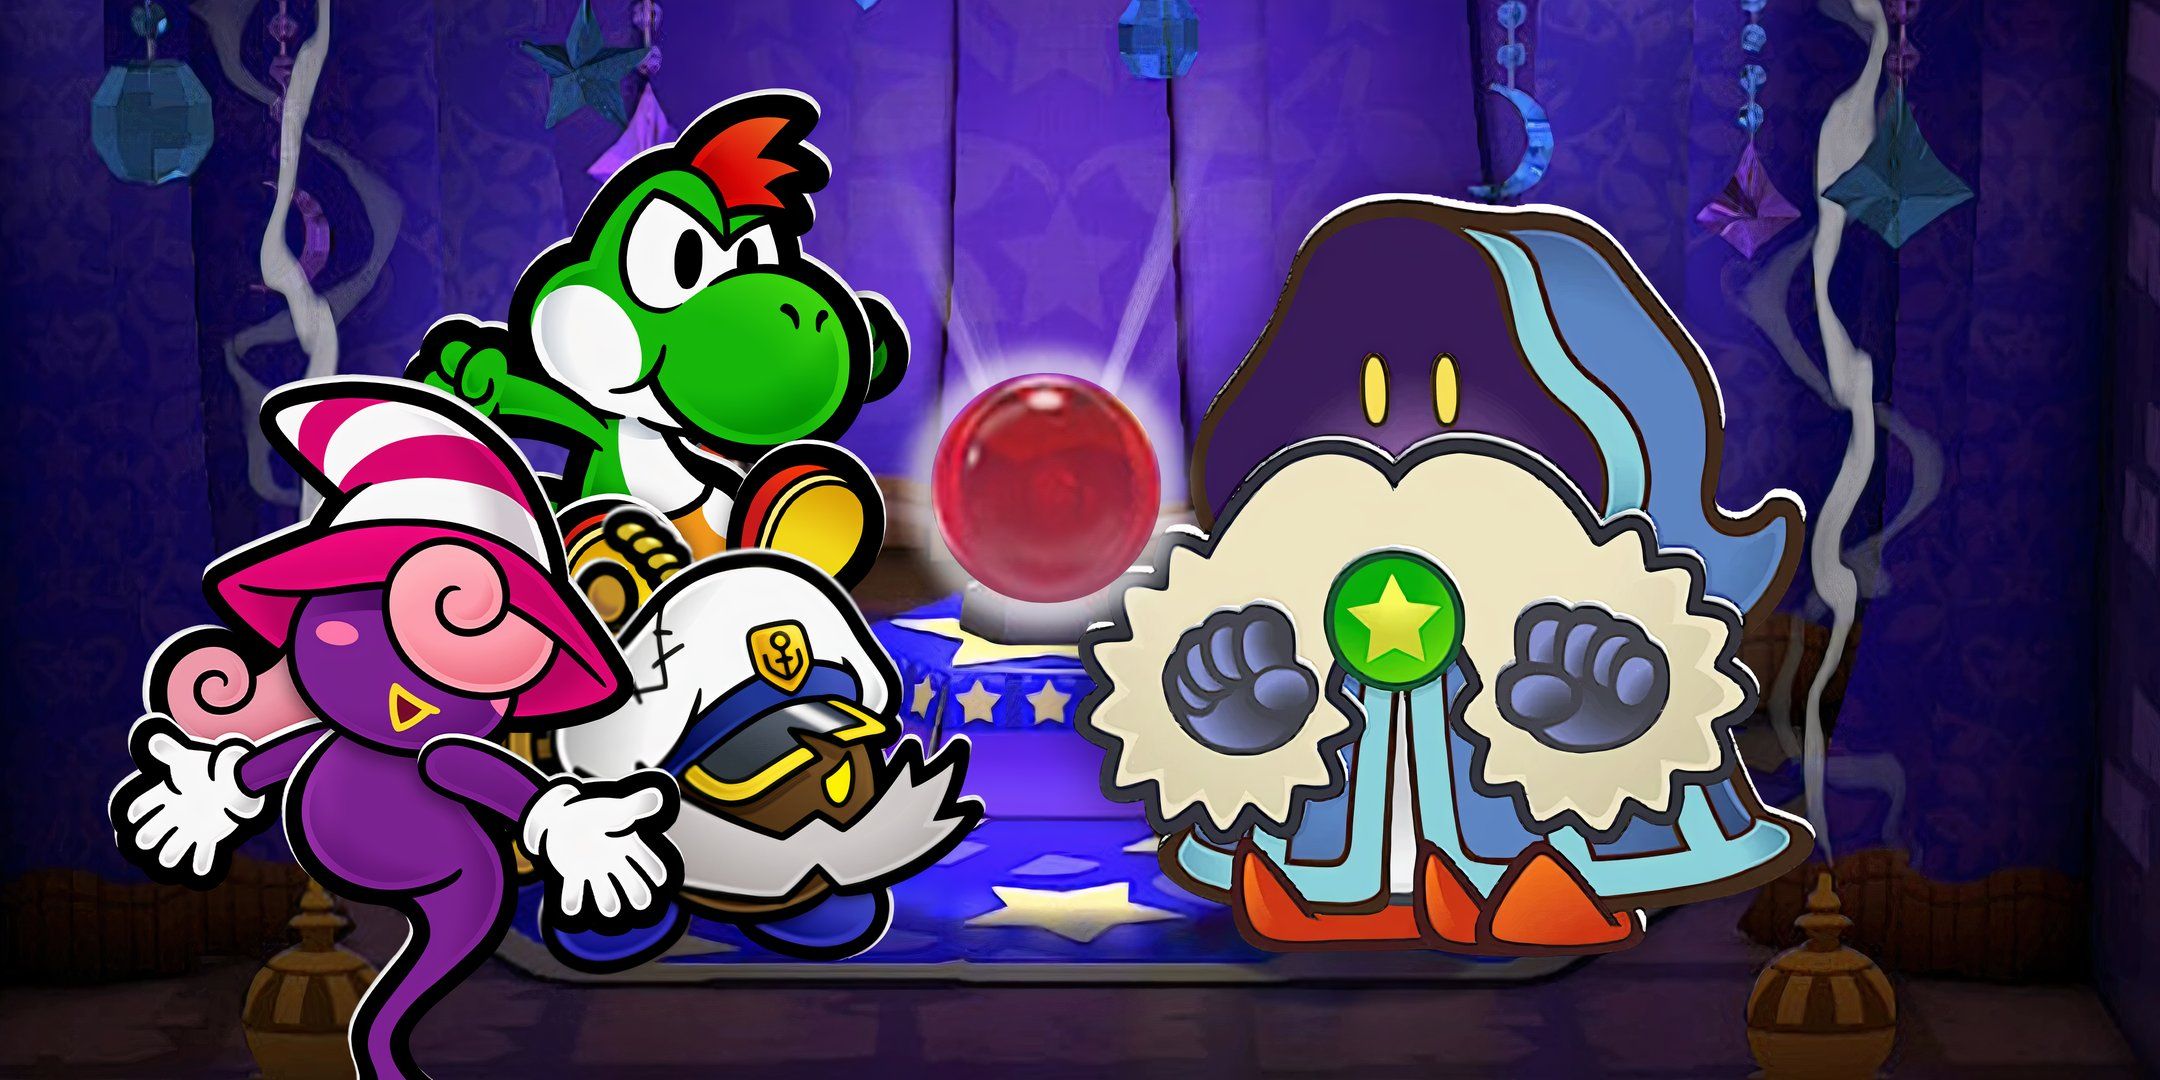 Paper Mario: The Thousand-Year Door - Merlon's Quest for Ultra Stone and Partner Ultra Rank